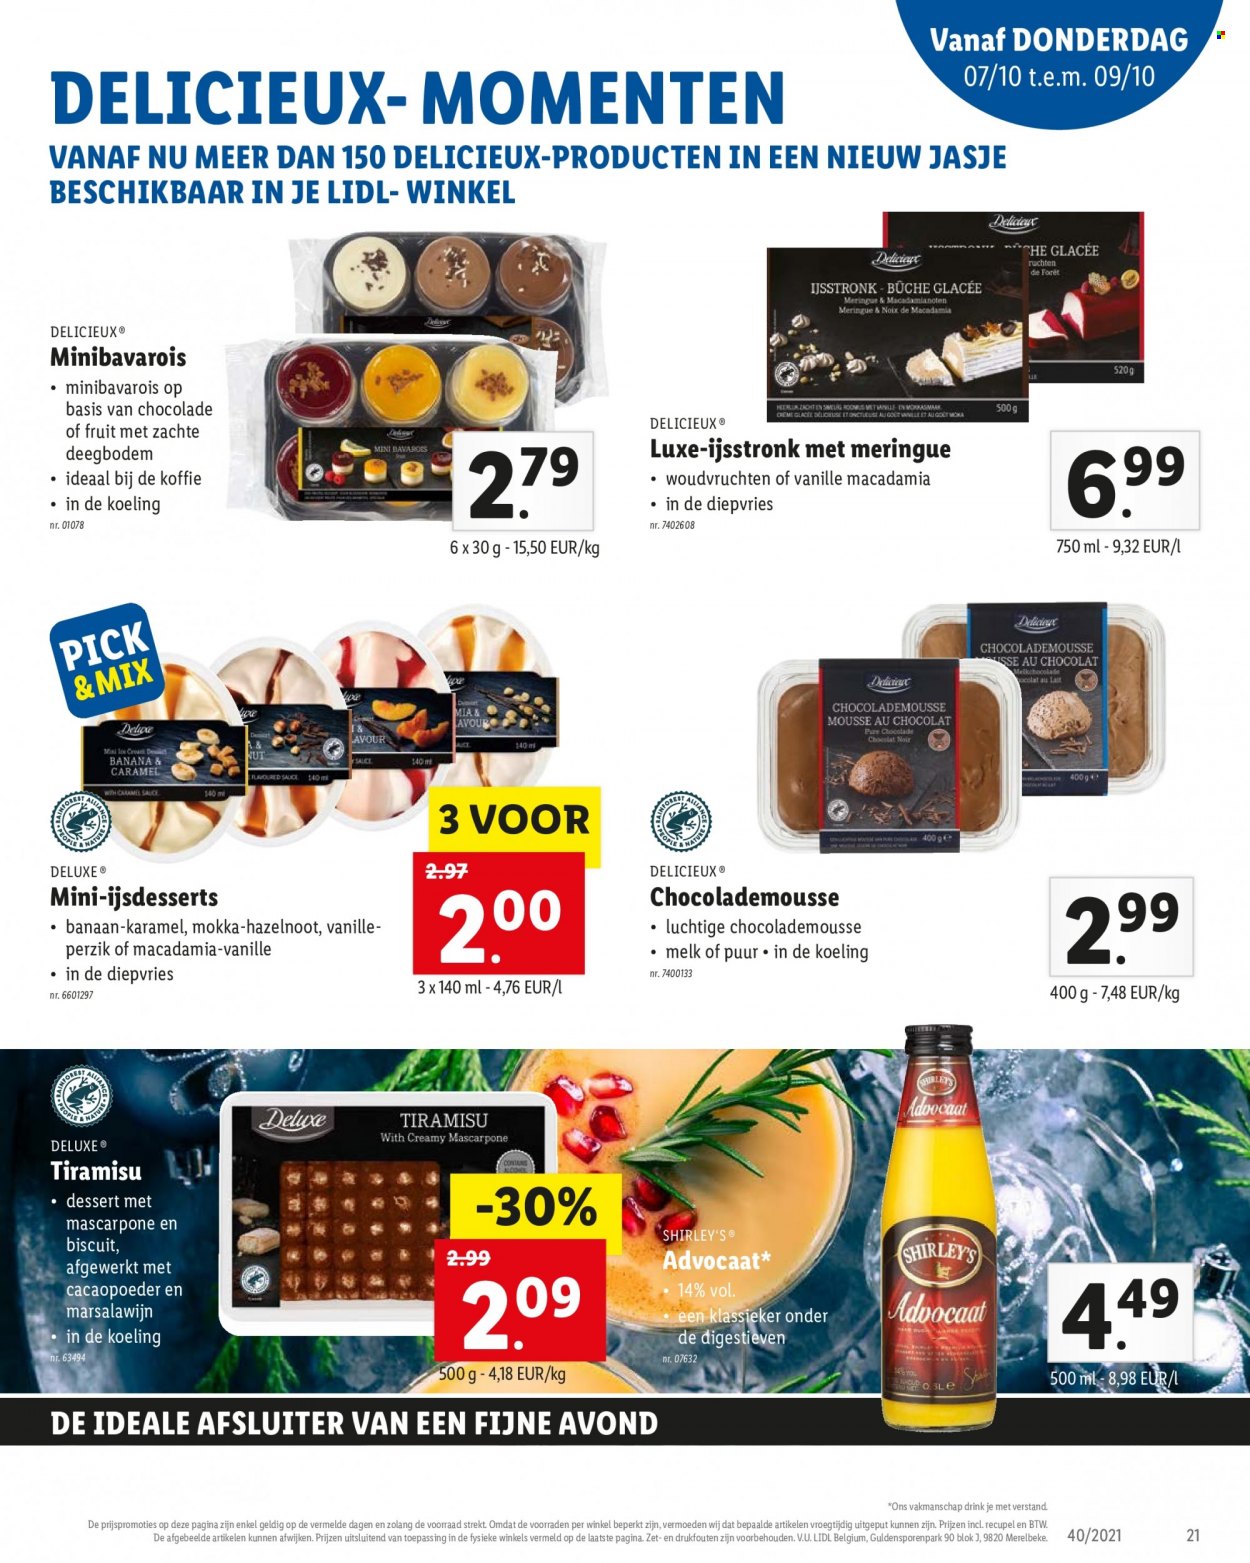 Catalogue Lidl - 4.10.2021 - 9.10.2021. Page 21.